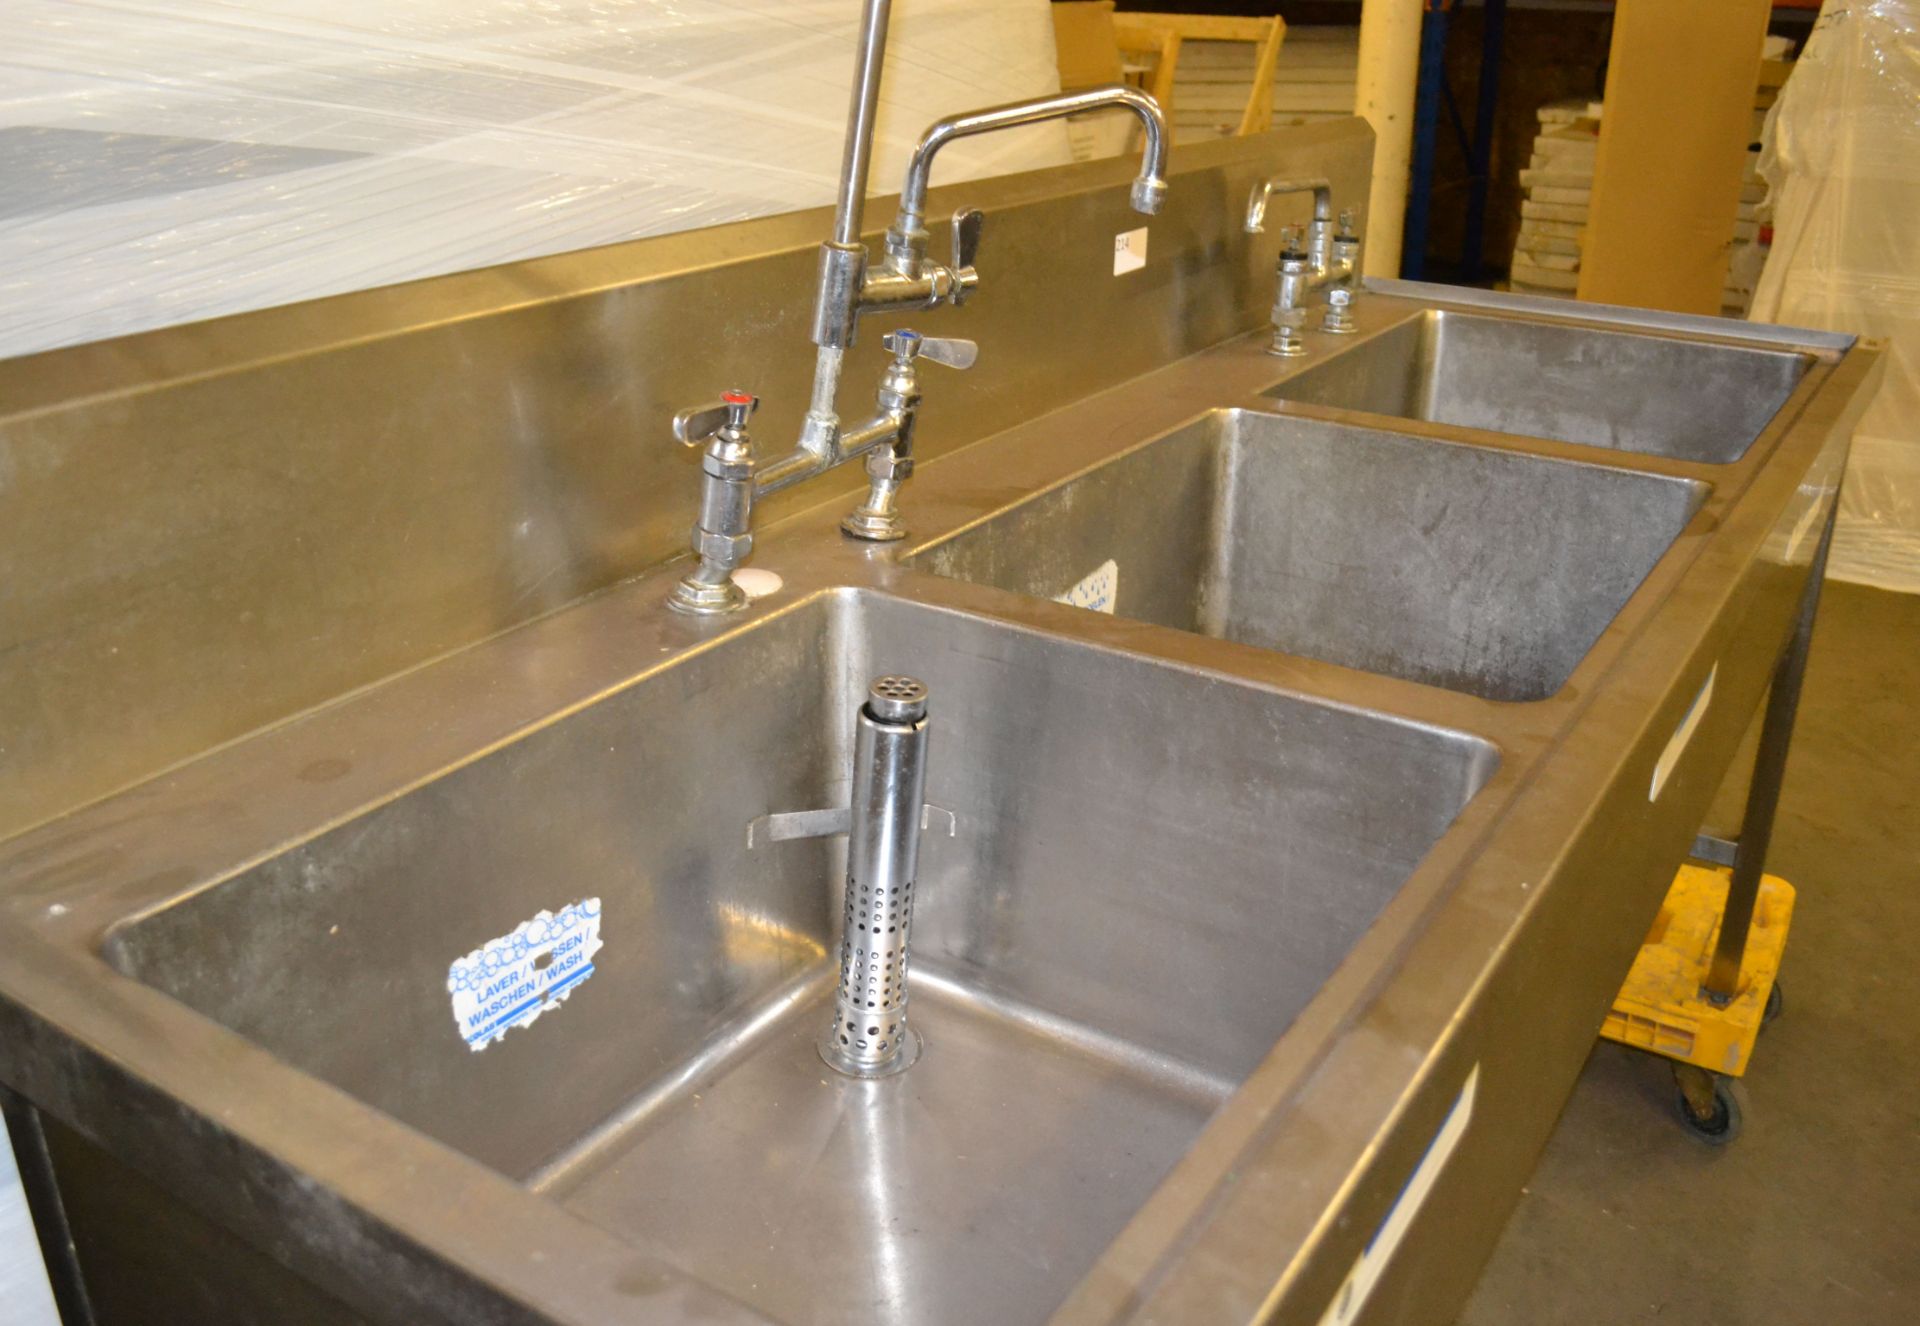 1 x Large Triple Sink Unit with Taps - Approx 190x66.5x108cm - Deep (approx. 30cm) Sinks - Ref:NCE03 - Image 4 of 9